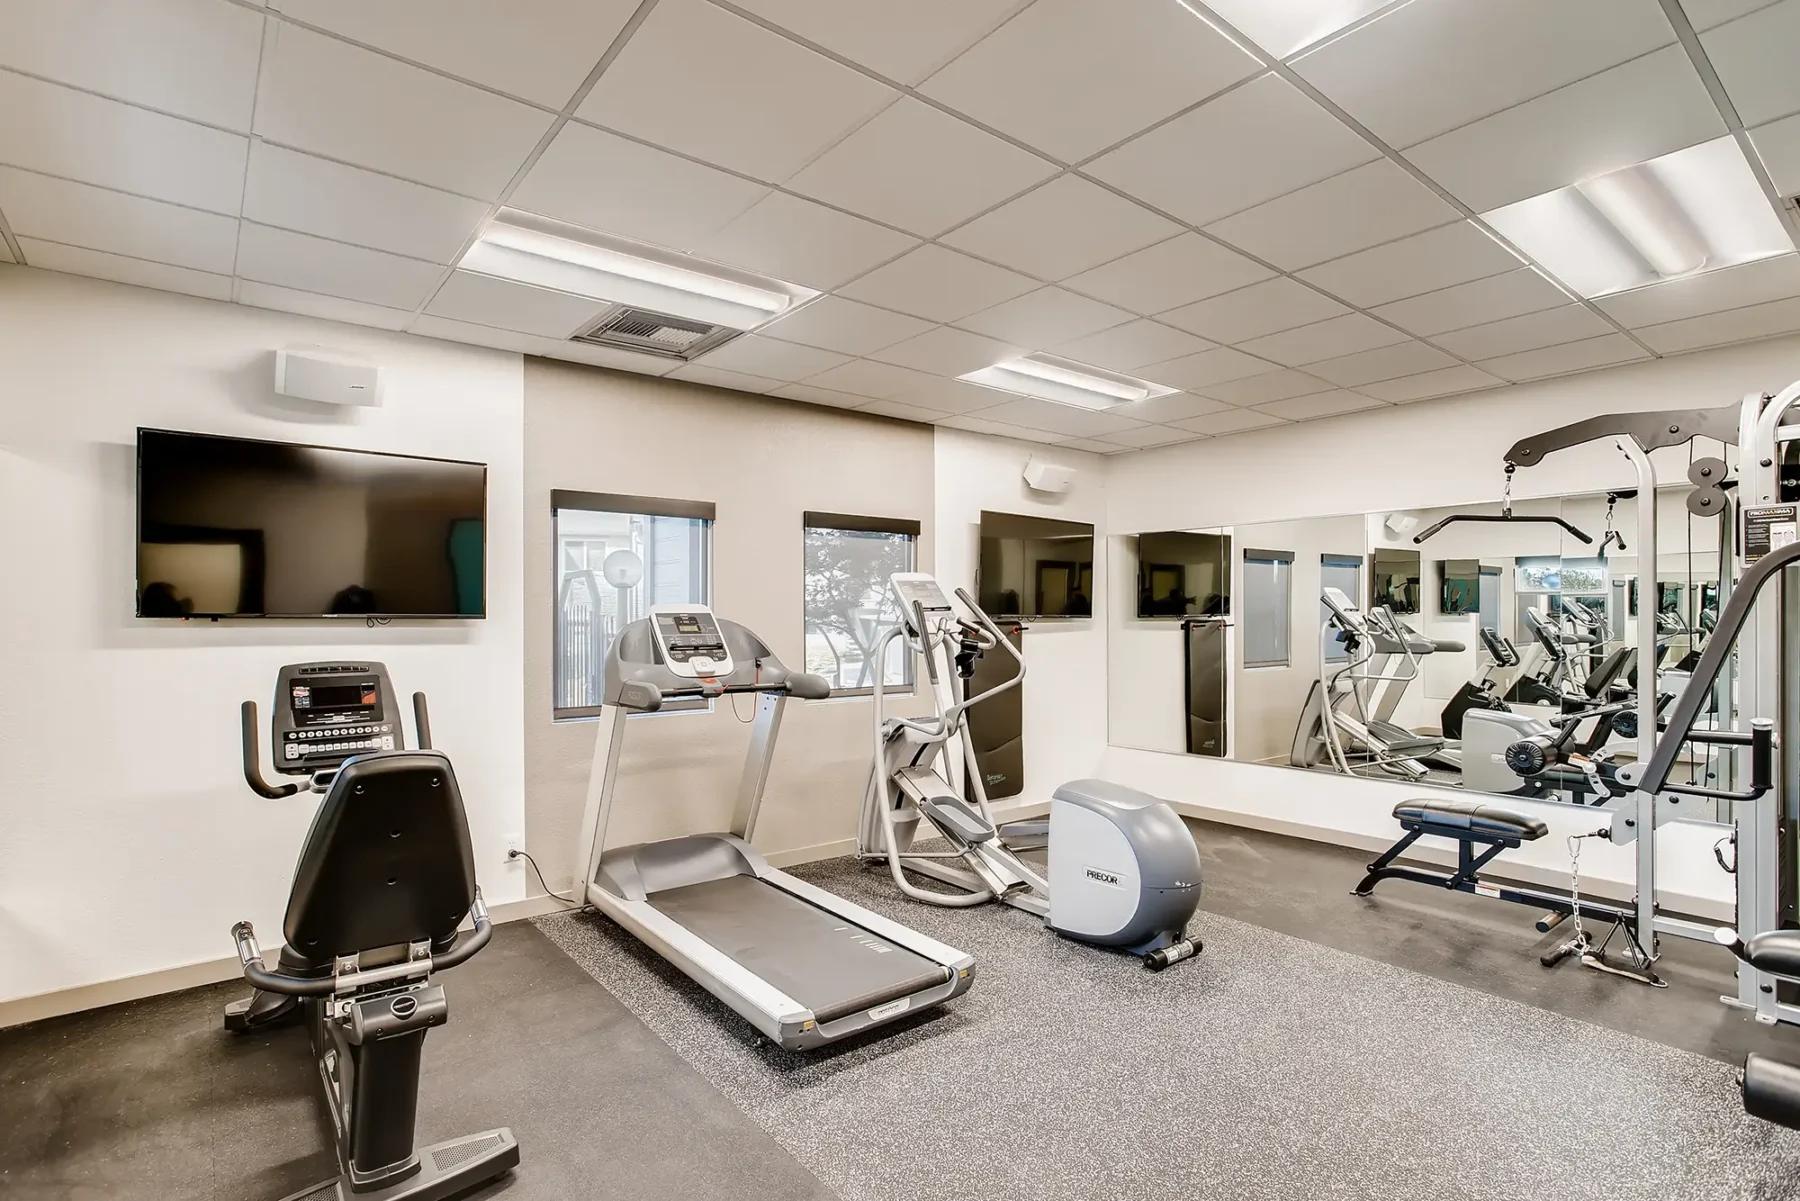 Fitness center with strength training and cardio machines